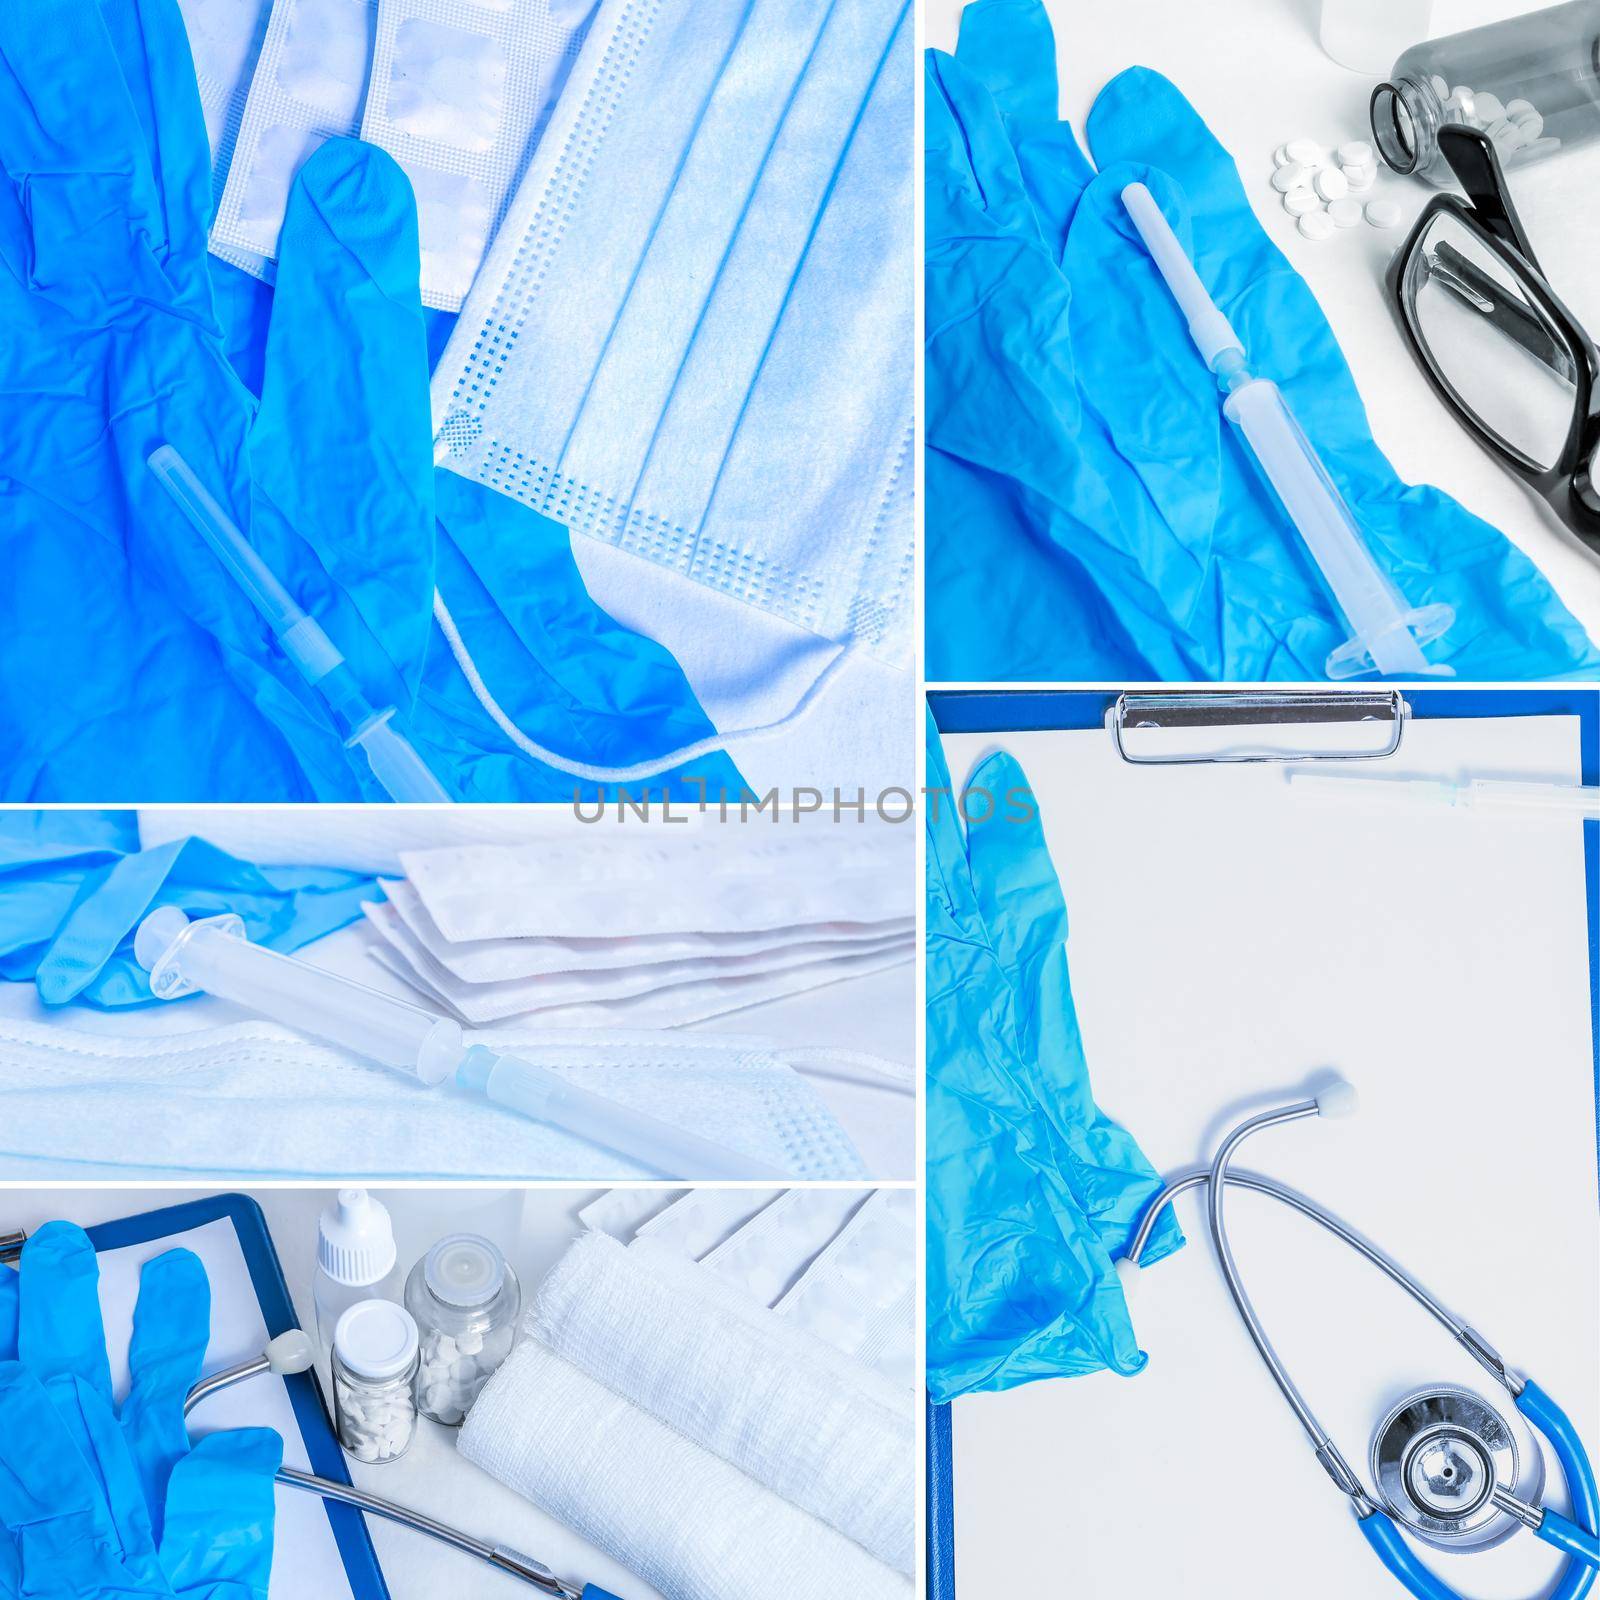 Сomposition of medical objects in blue tones